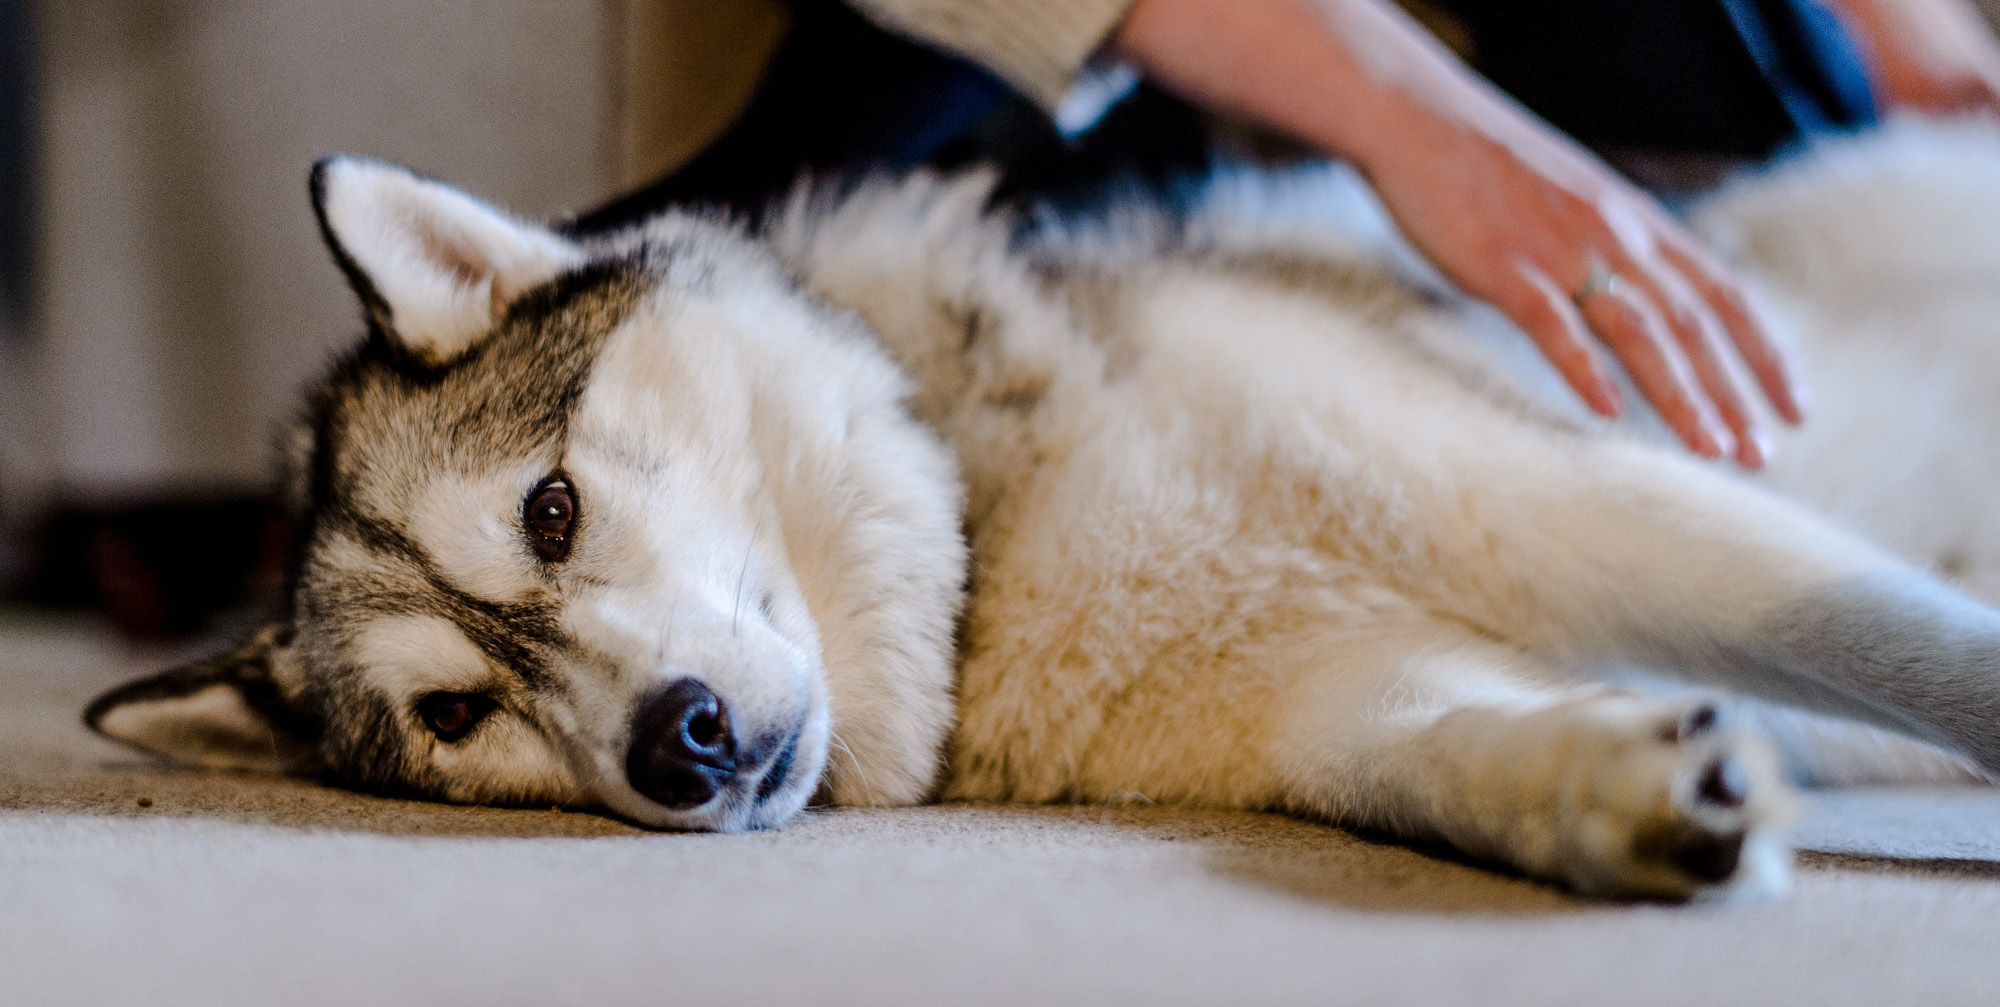 A husky lies down beside her owners